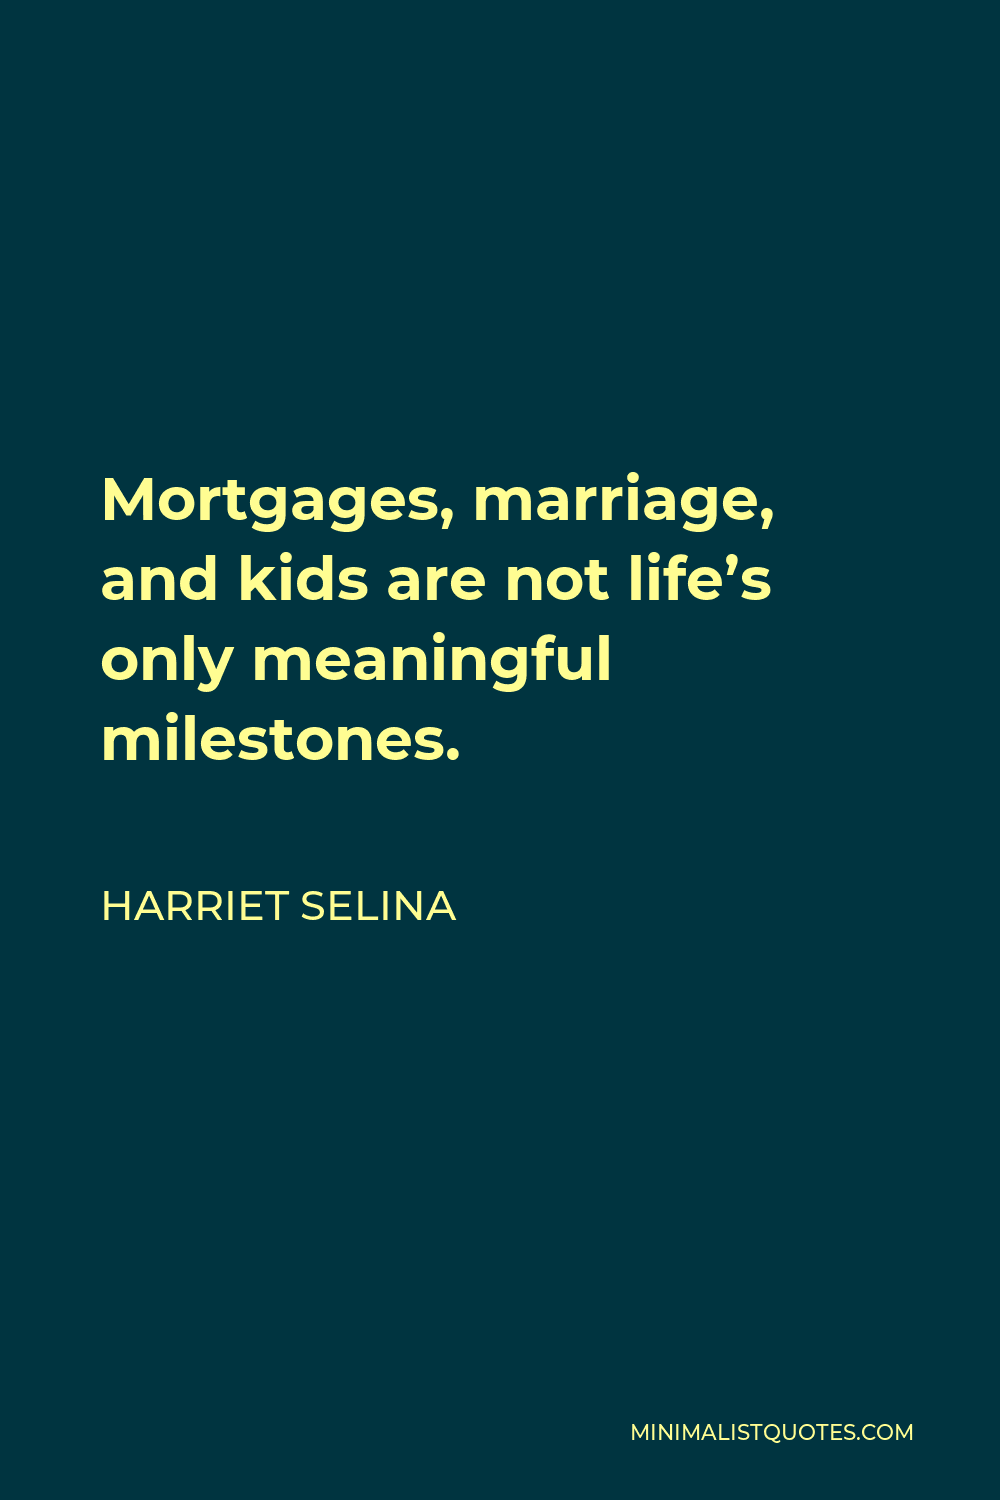 Harriet Selina Quote - Mortgages, marriage, and kids are not life’s only meaningful milestones.